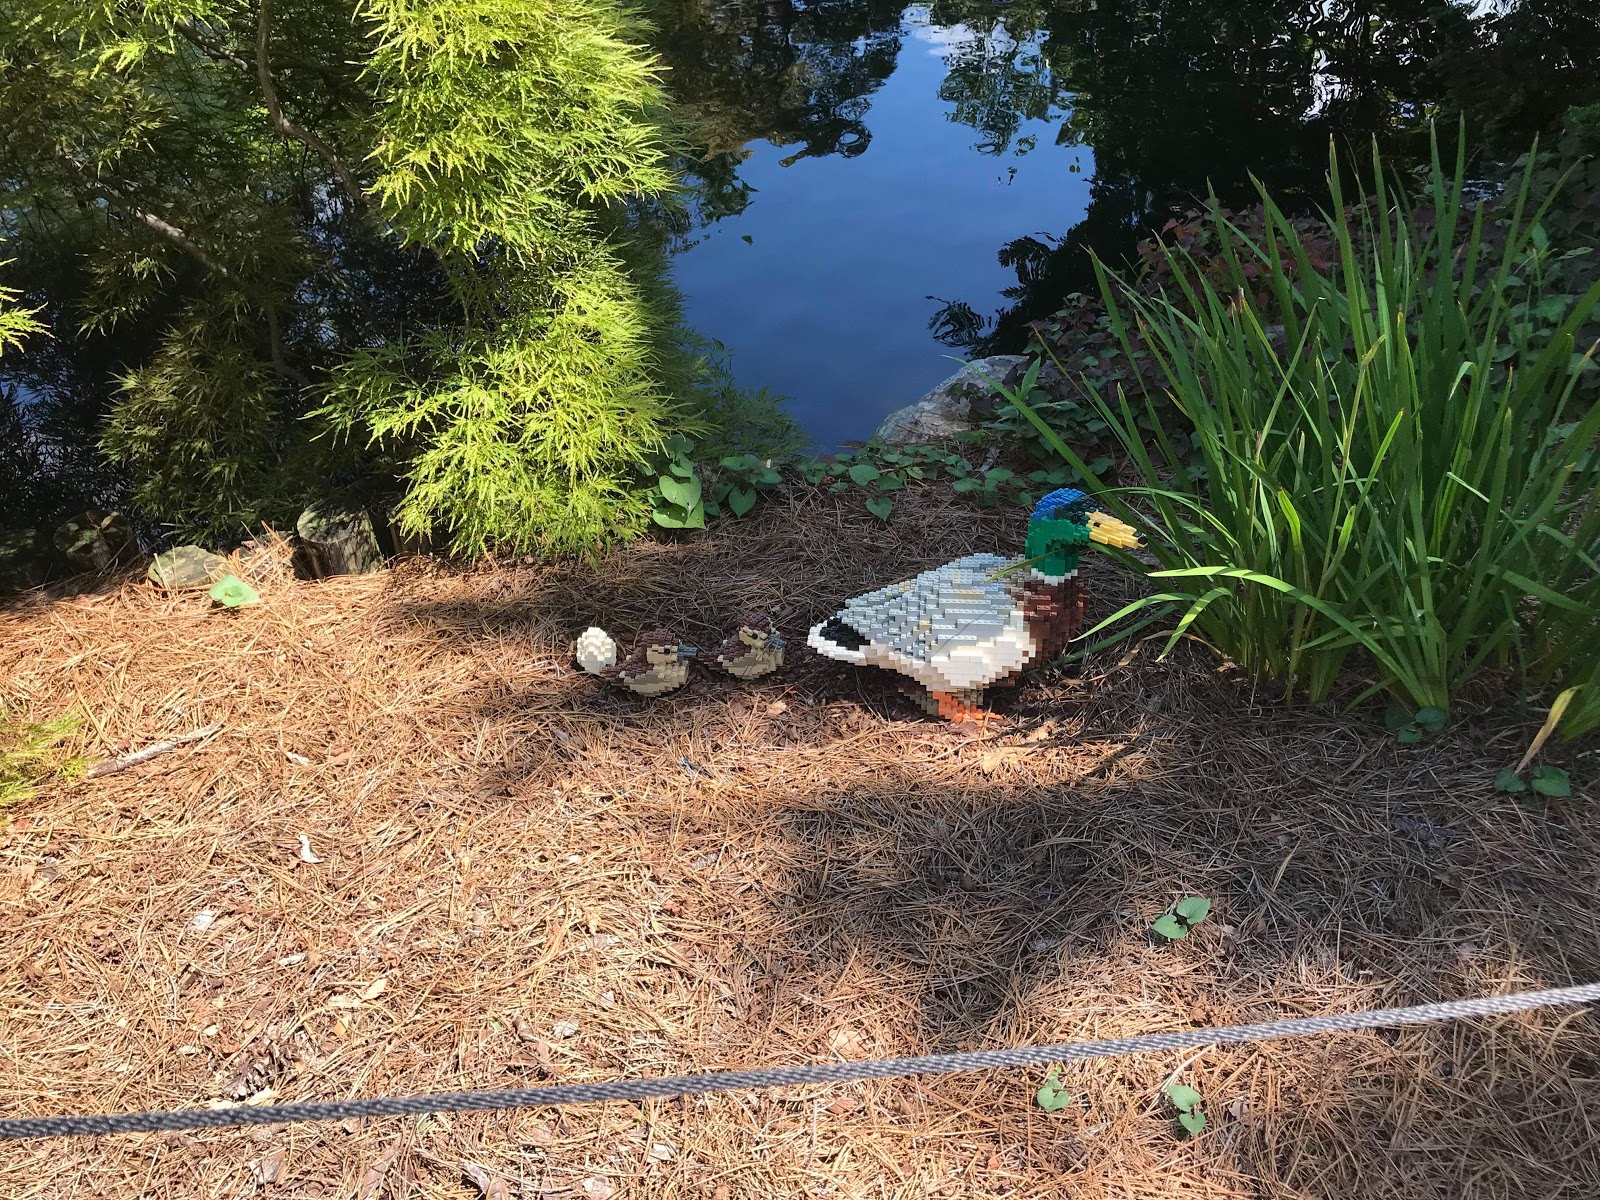 A mother and baby ducks made of Lego bricks beside a lake